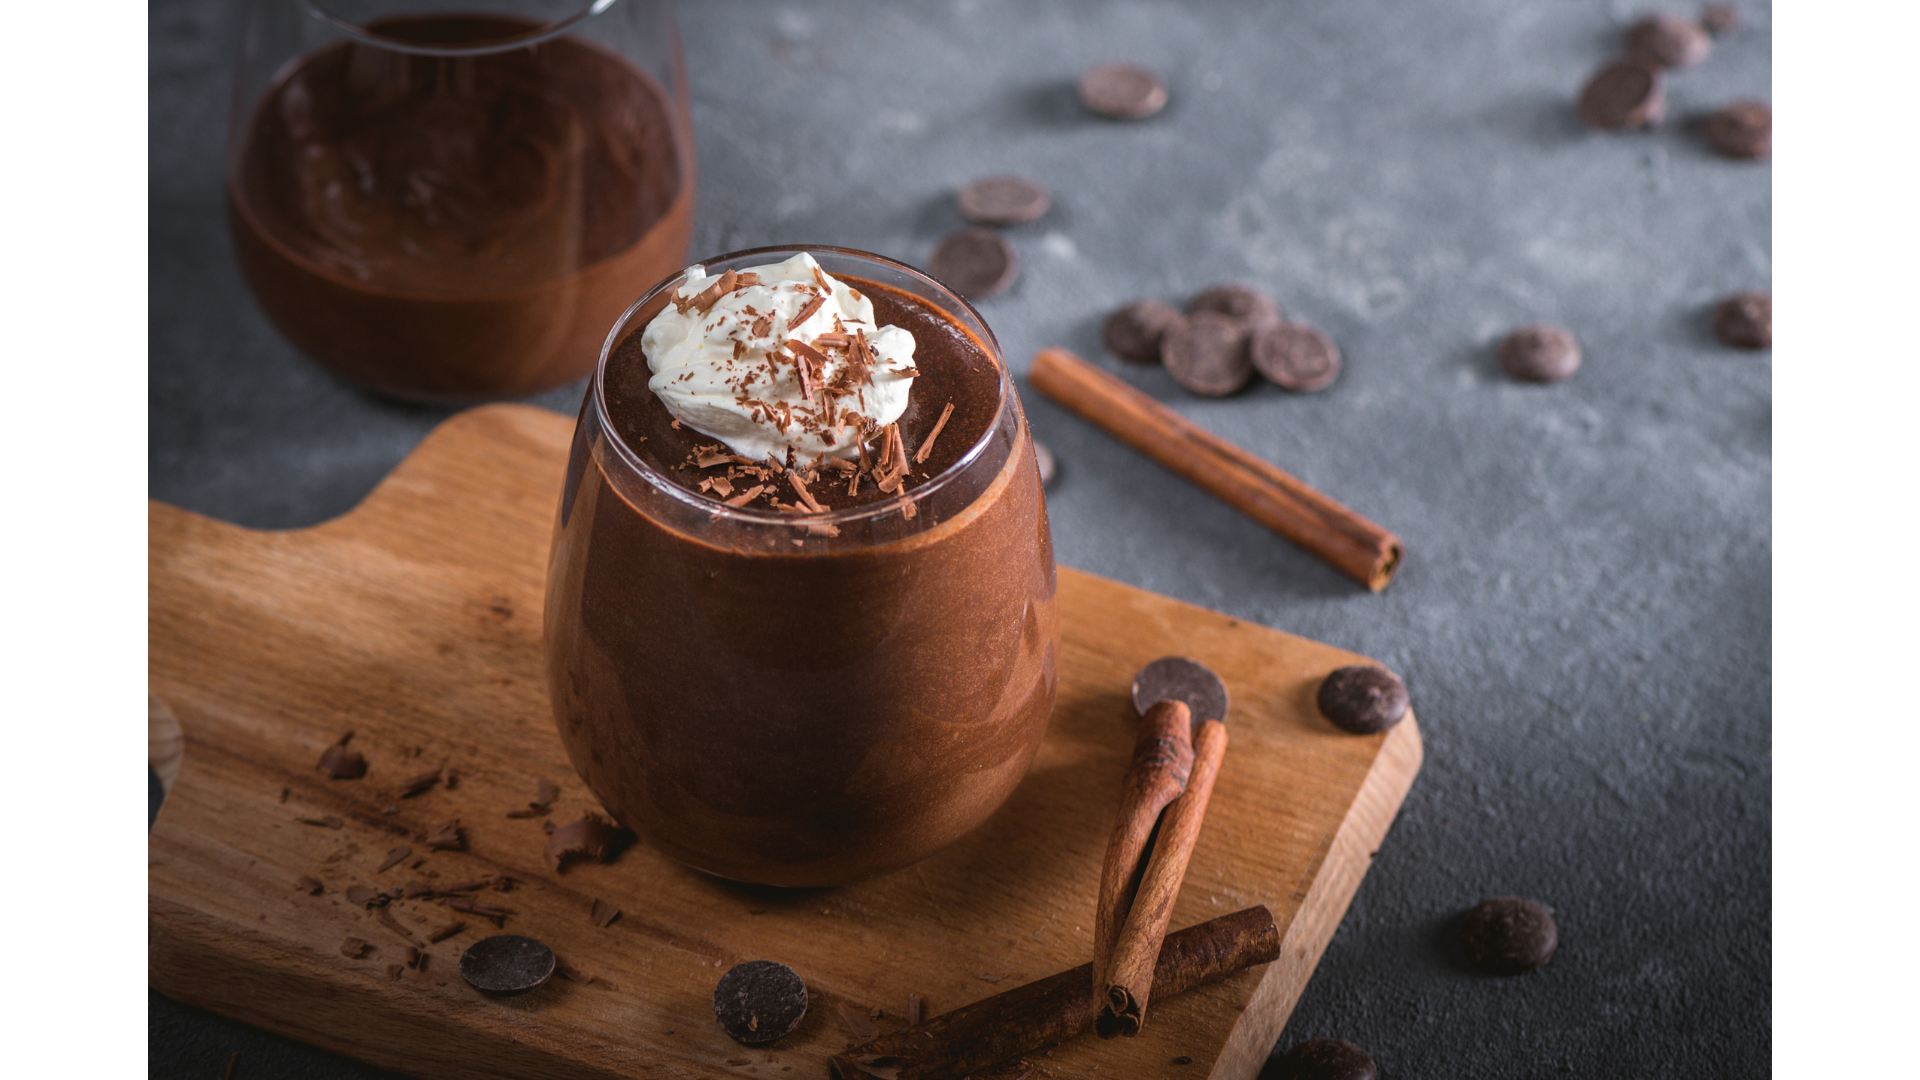 Indulging Cravings: Is It Safe to Enjoy Chocolate Mousse During